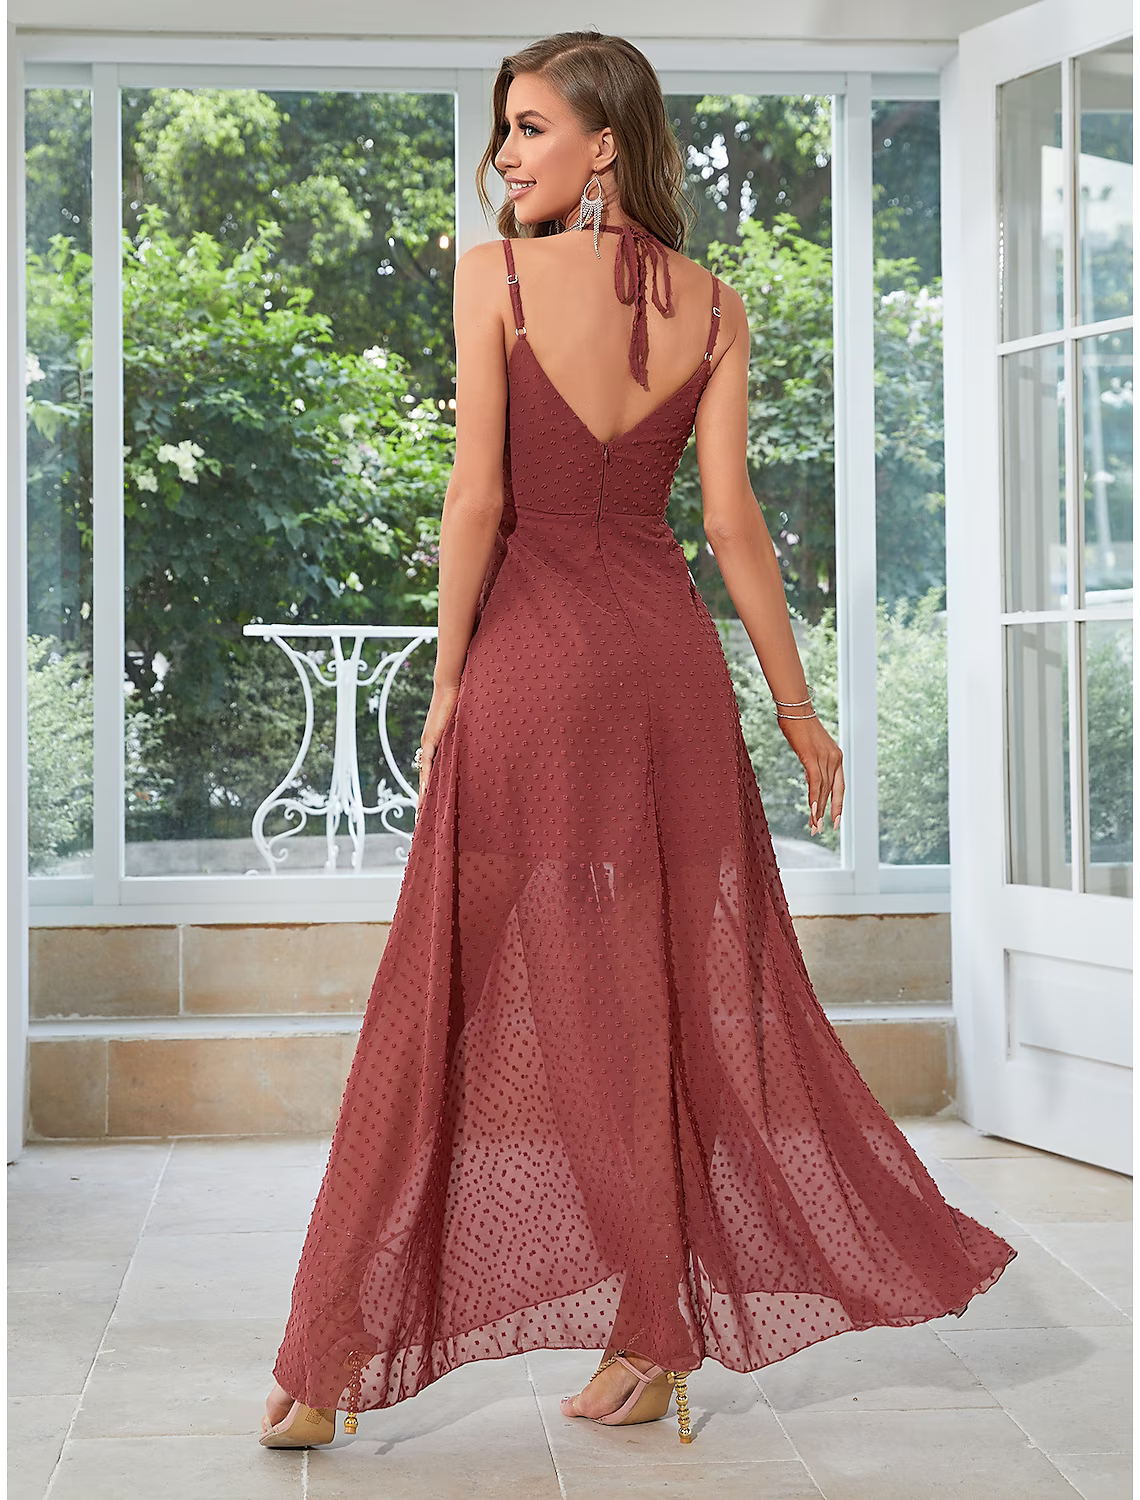 A-Line Wedding Guest Dresses Elegant Dress Party Wear Floor Length Sleeveless Strap Chiffon with Strappy